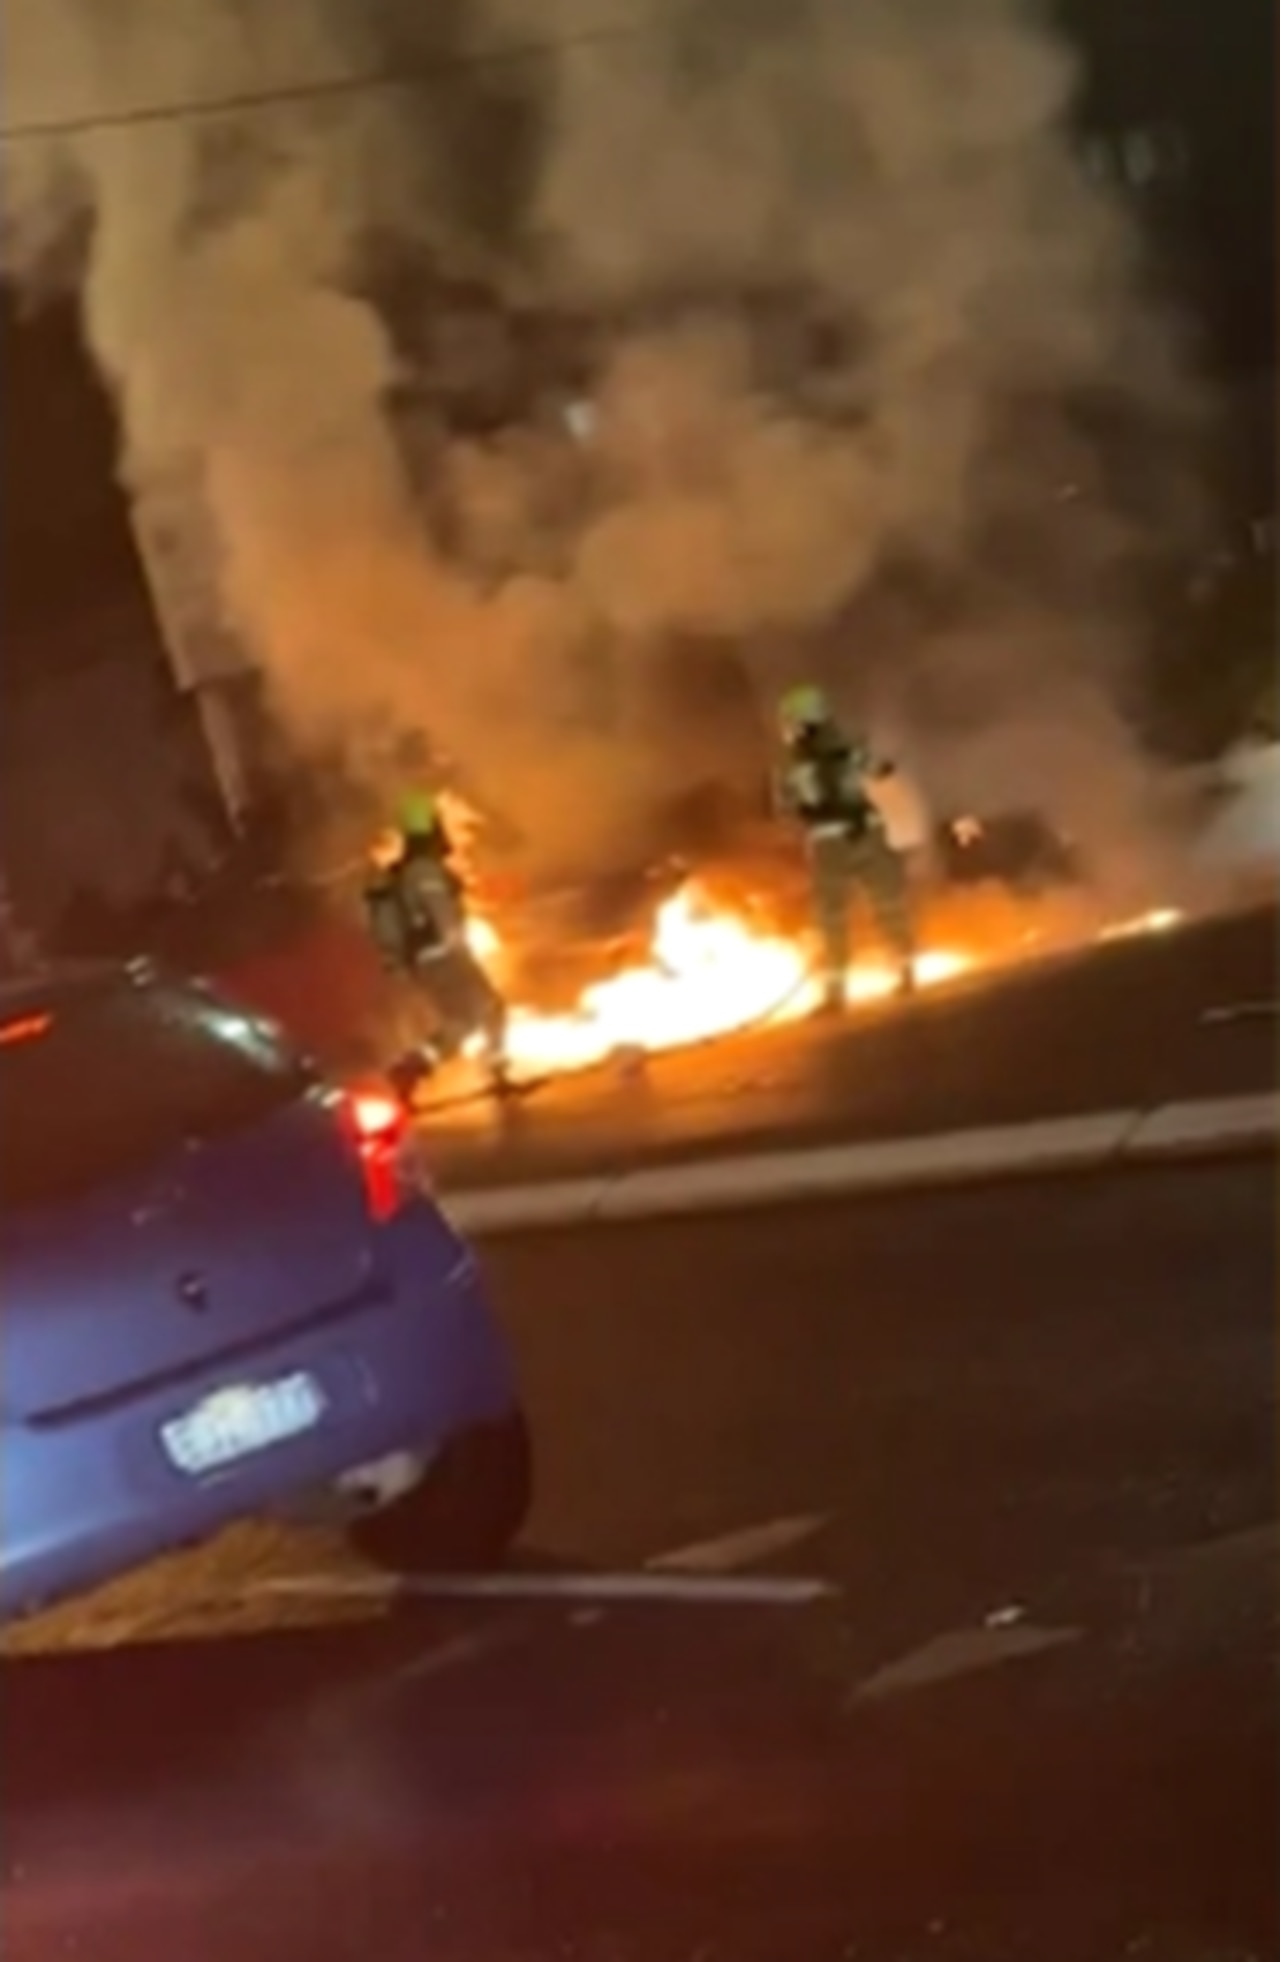 Firefighters worked through the night to extinguish the flames on the burning car. Picture: 7 News